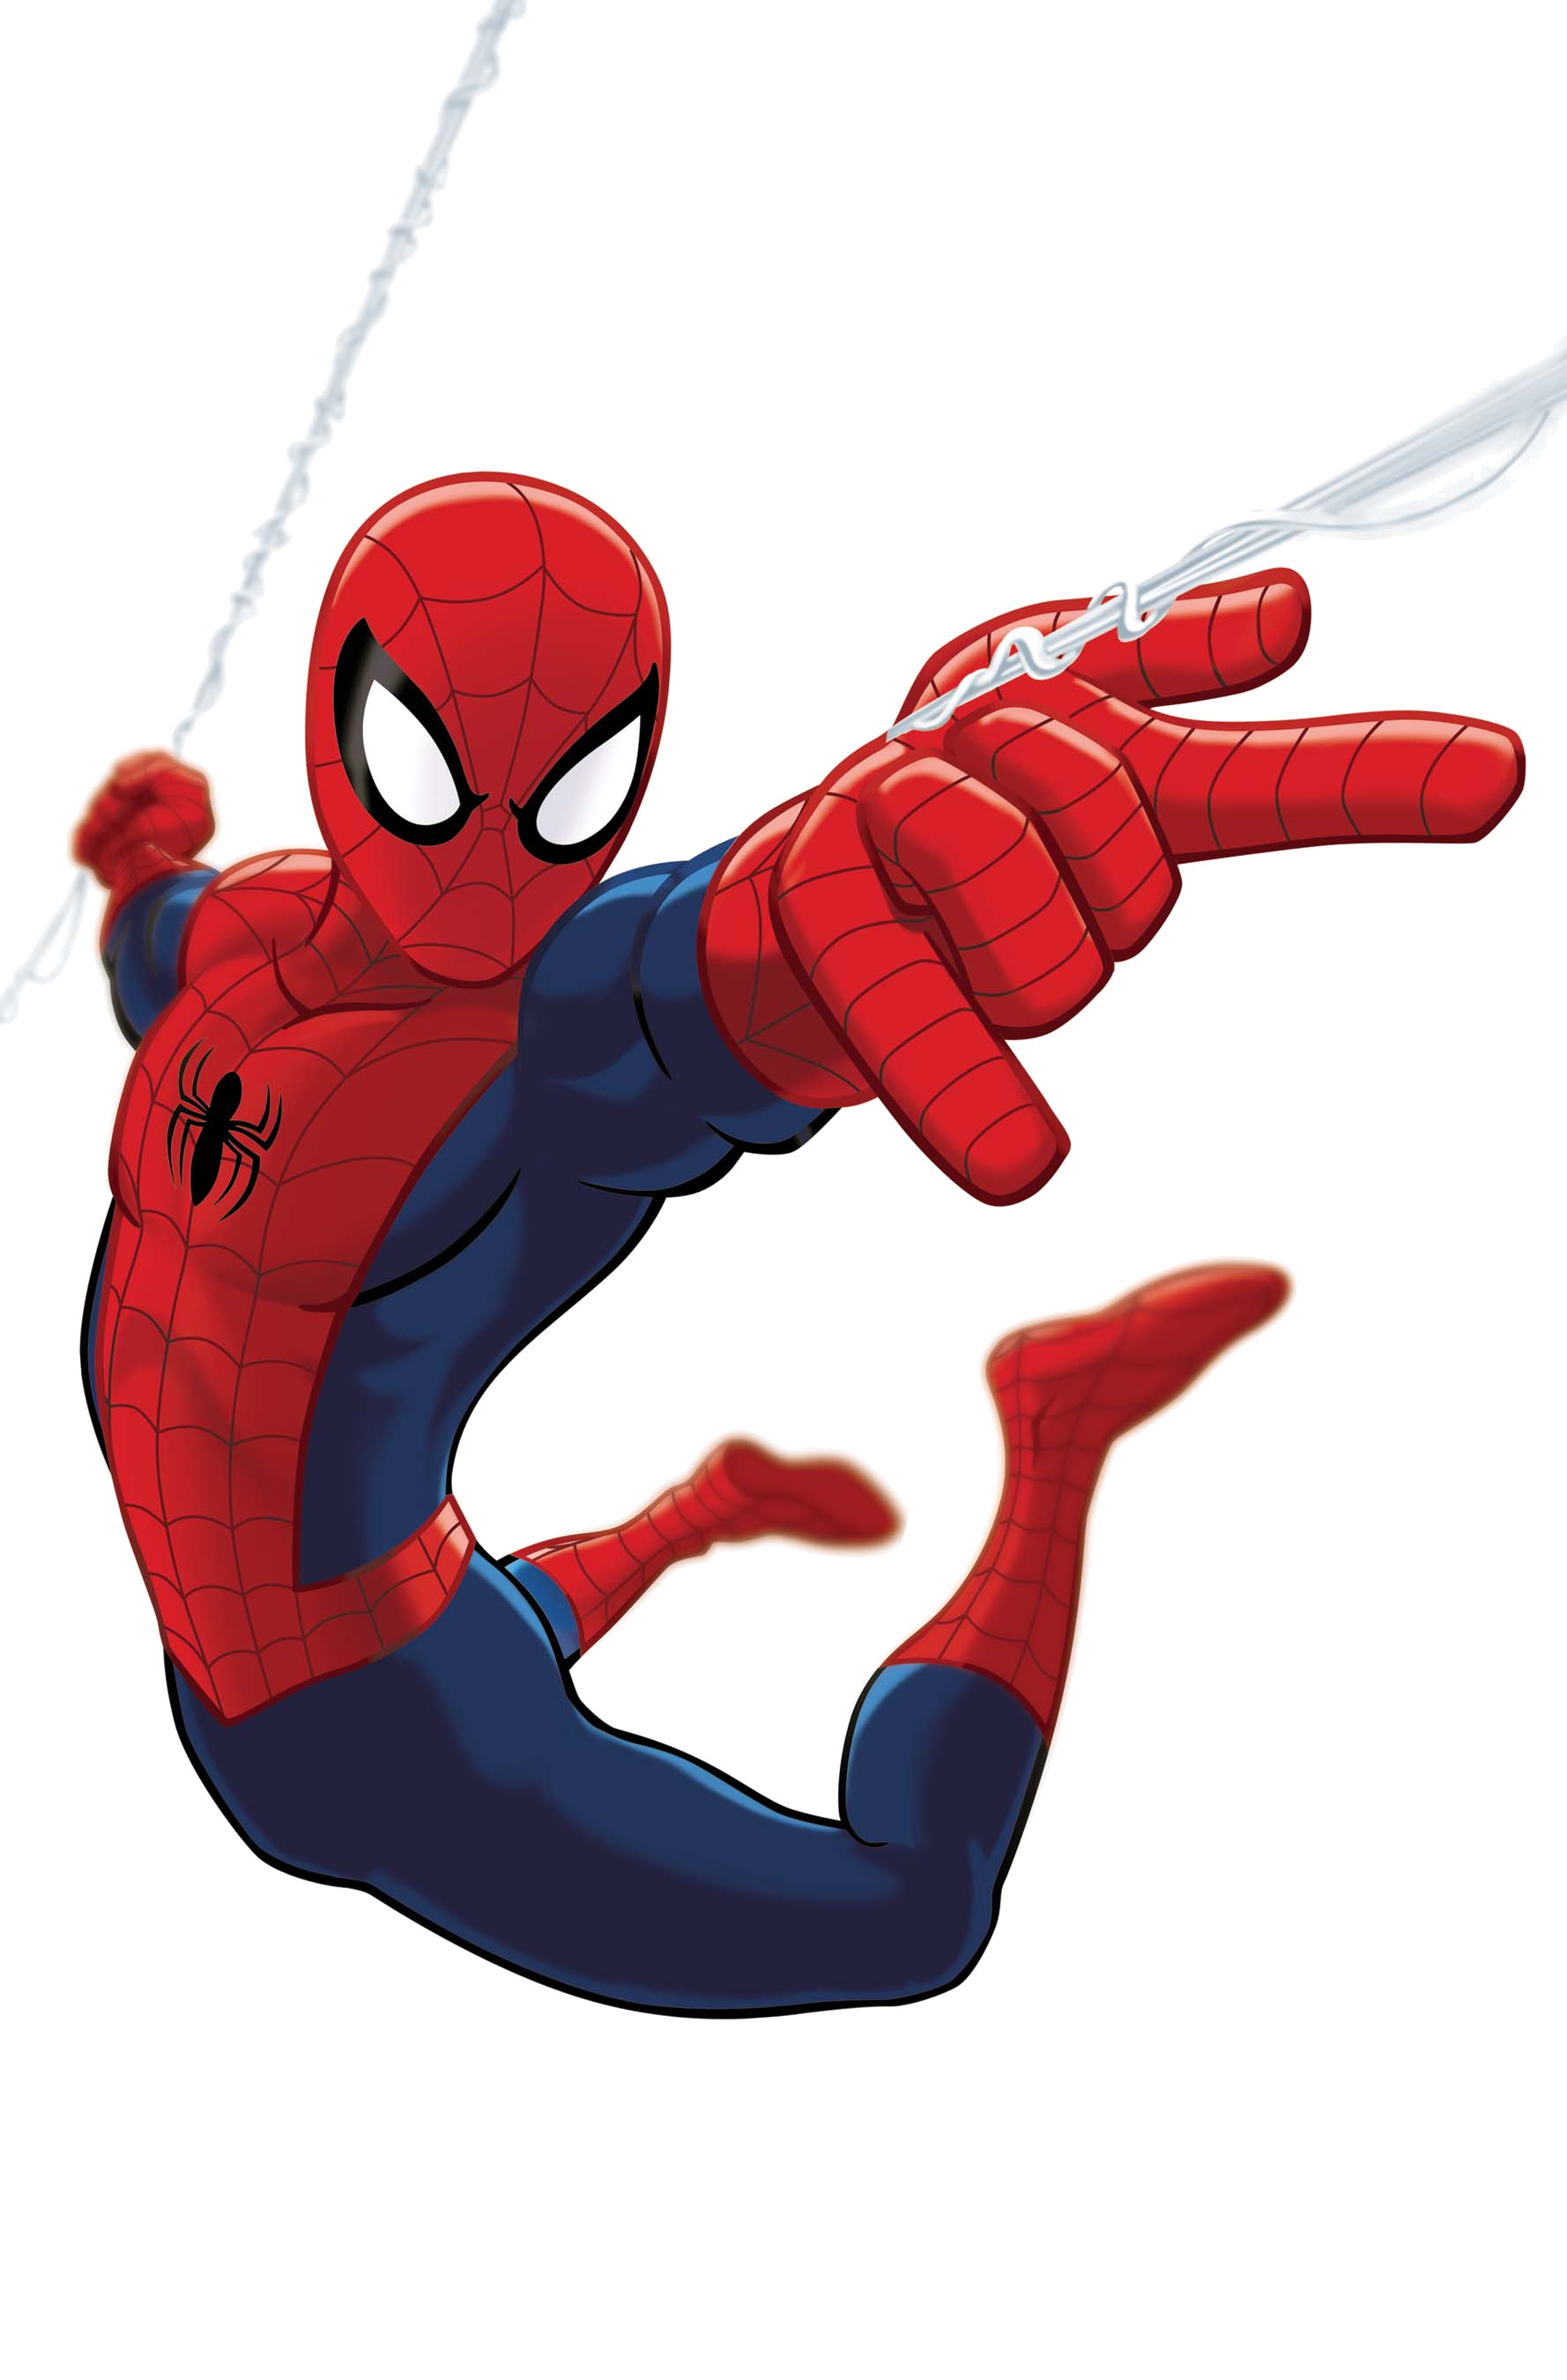 Ultimate spider man game file mod hd